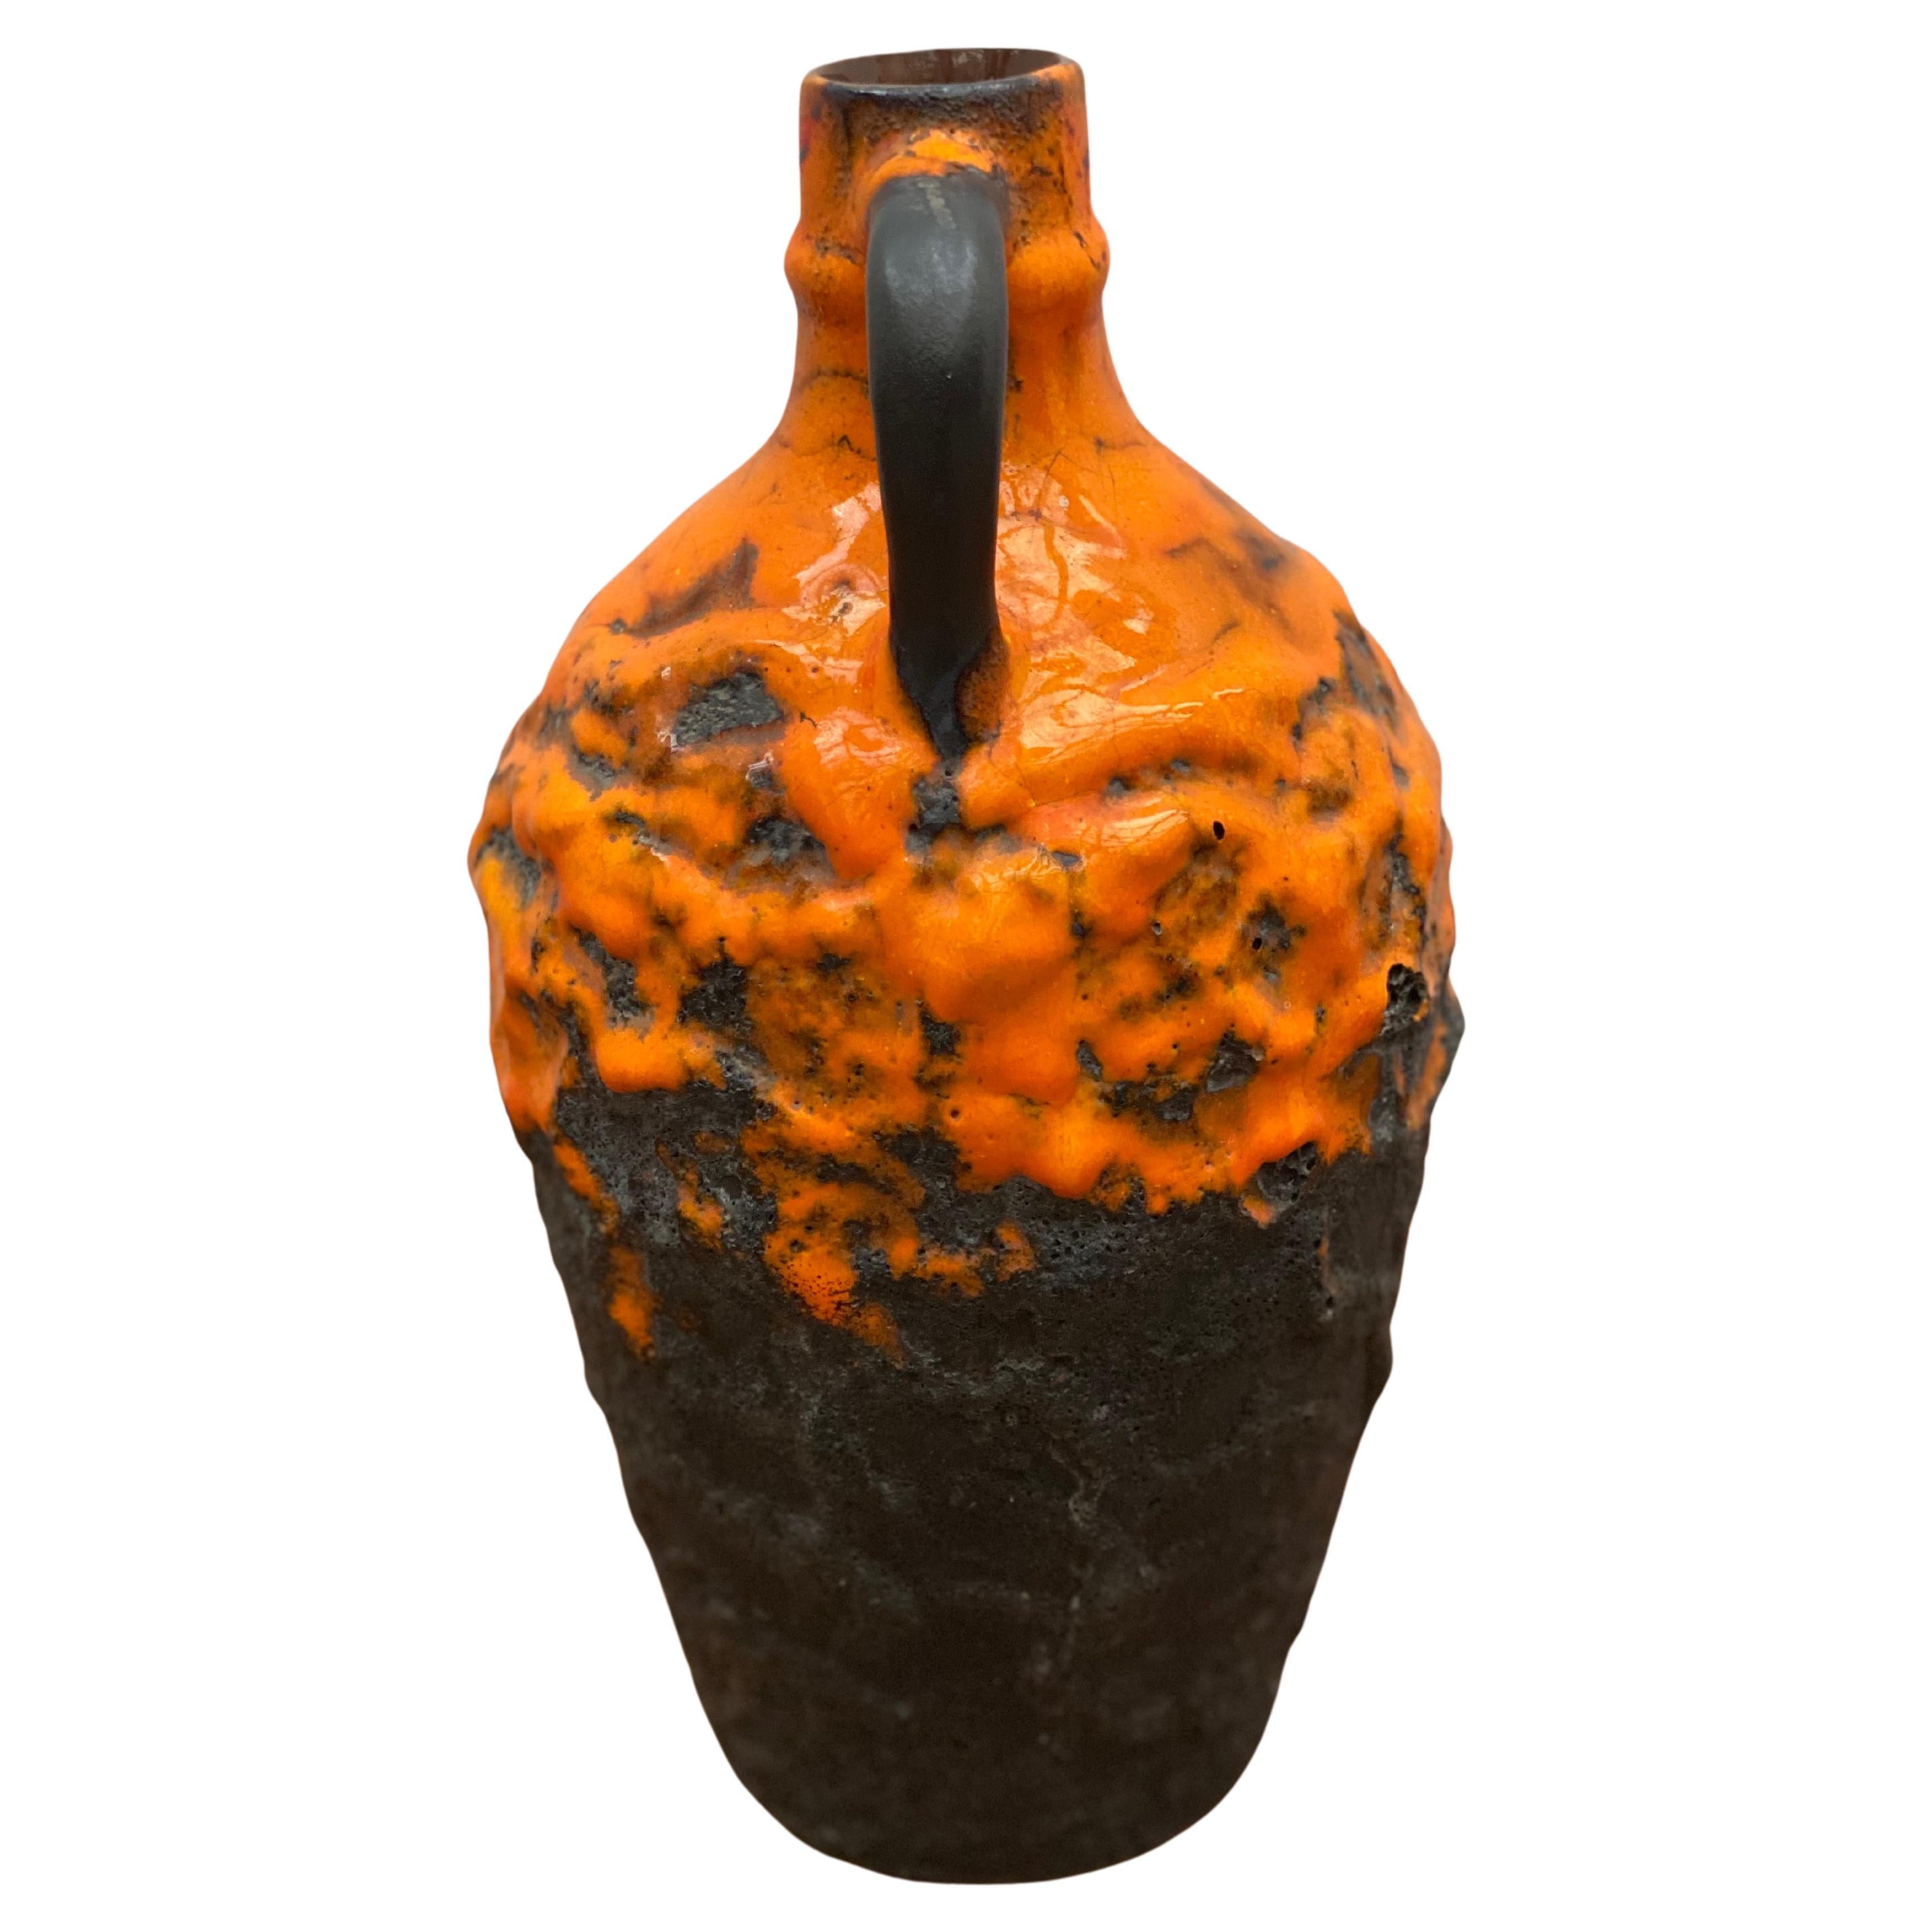 An orange, brown fat lava ceramic vase designed and manufactured in Germany by Carstens in perfect condition signed on the bottom with W. Germany.
The bright Orange color is a must have for your interior.